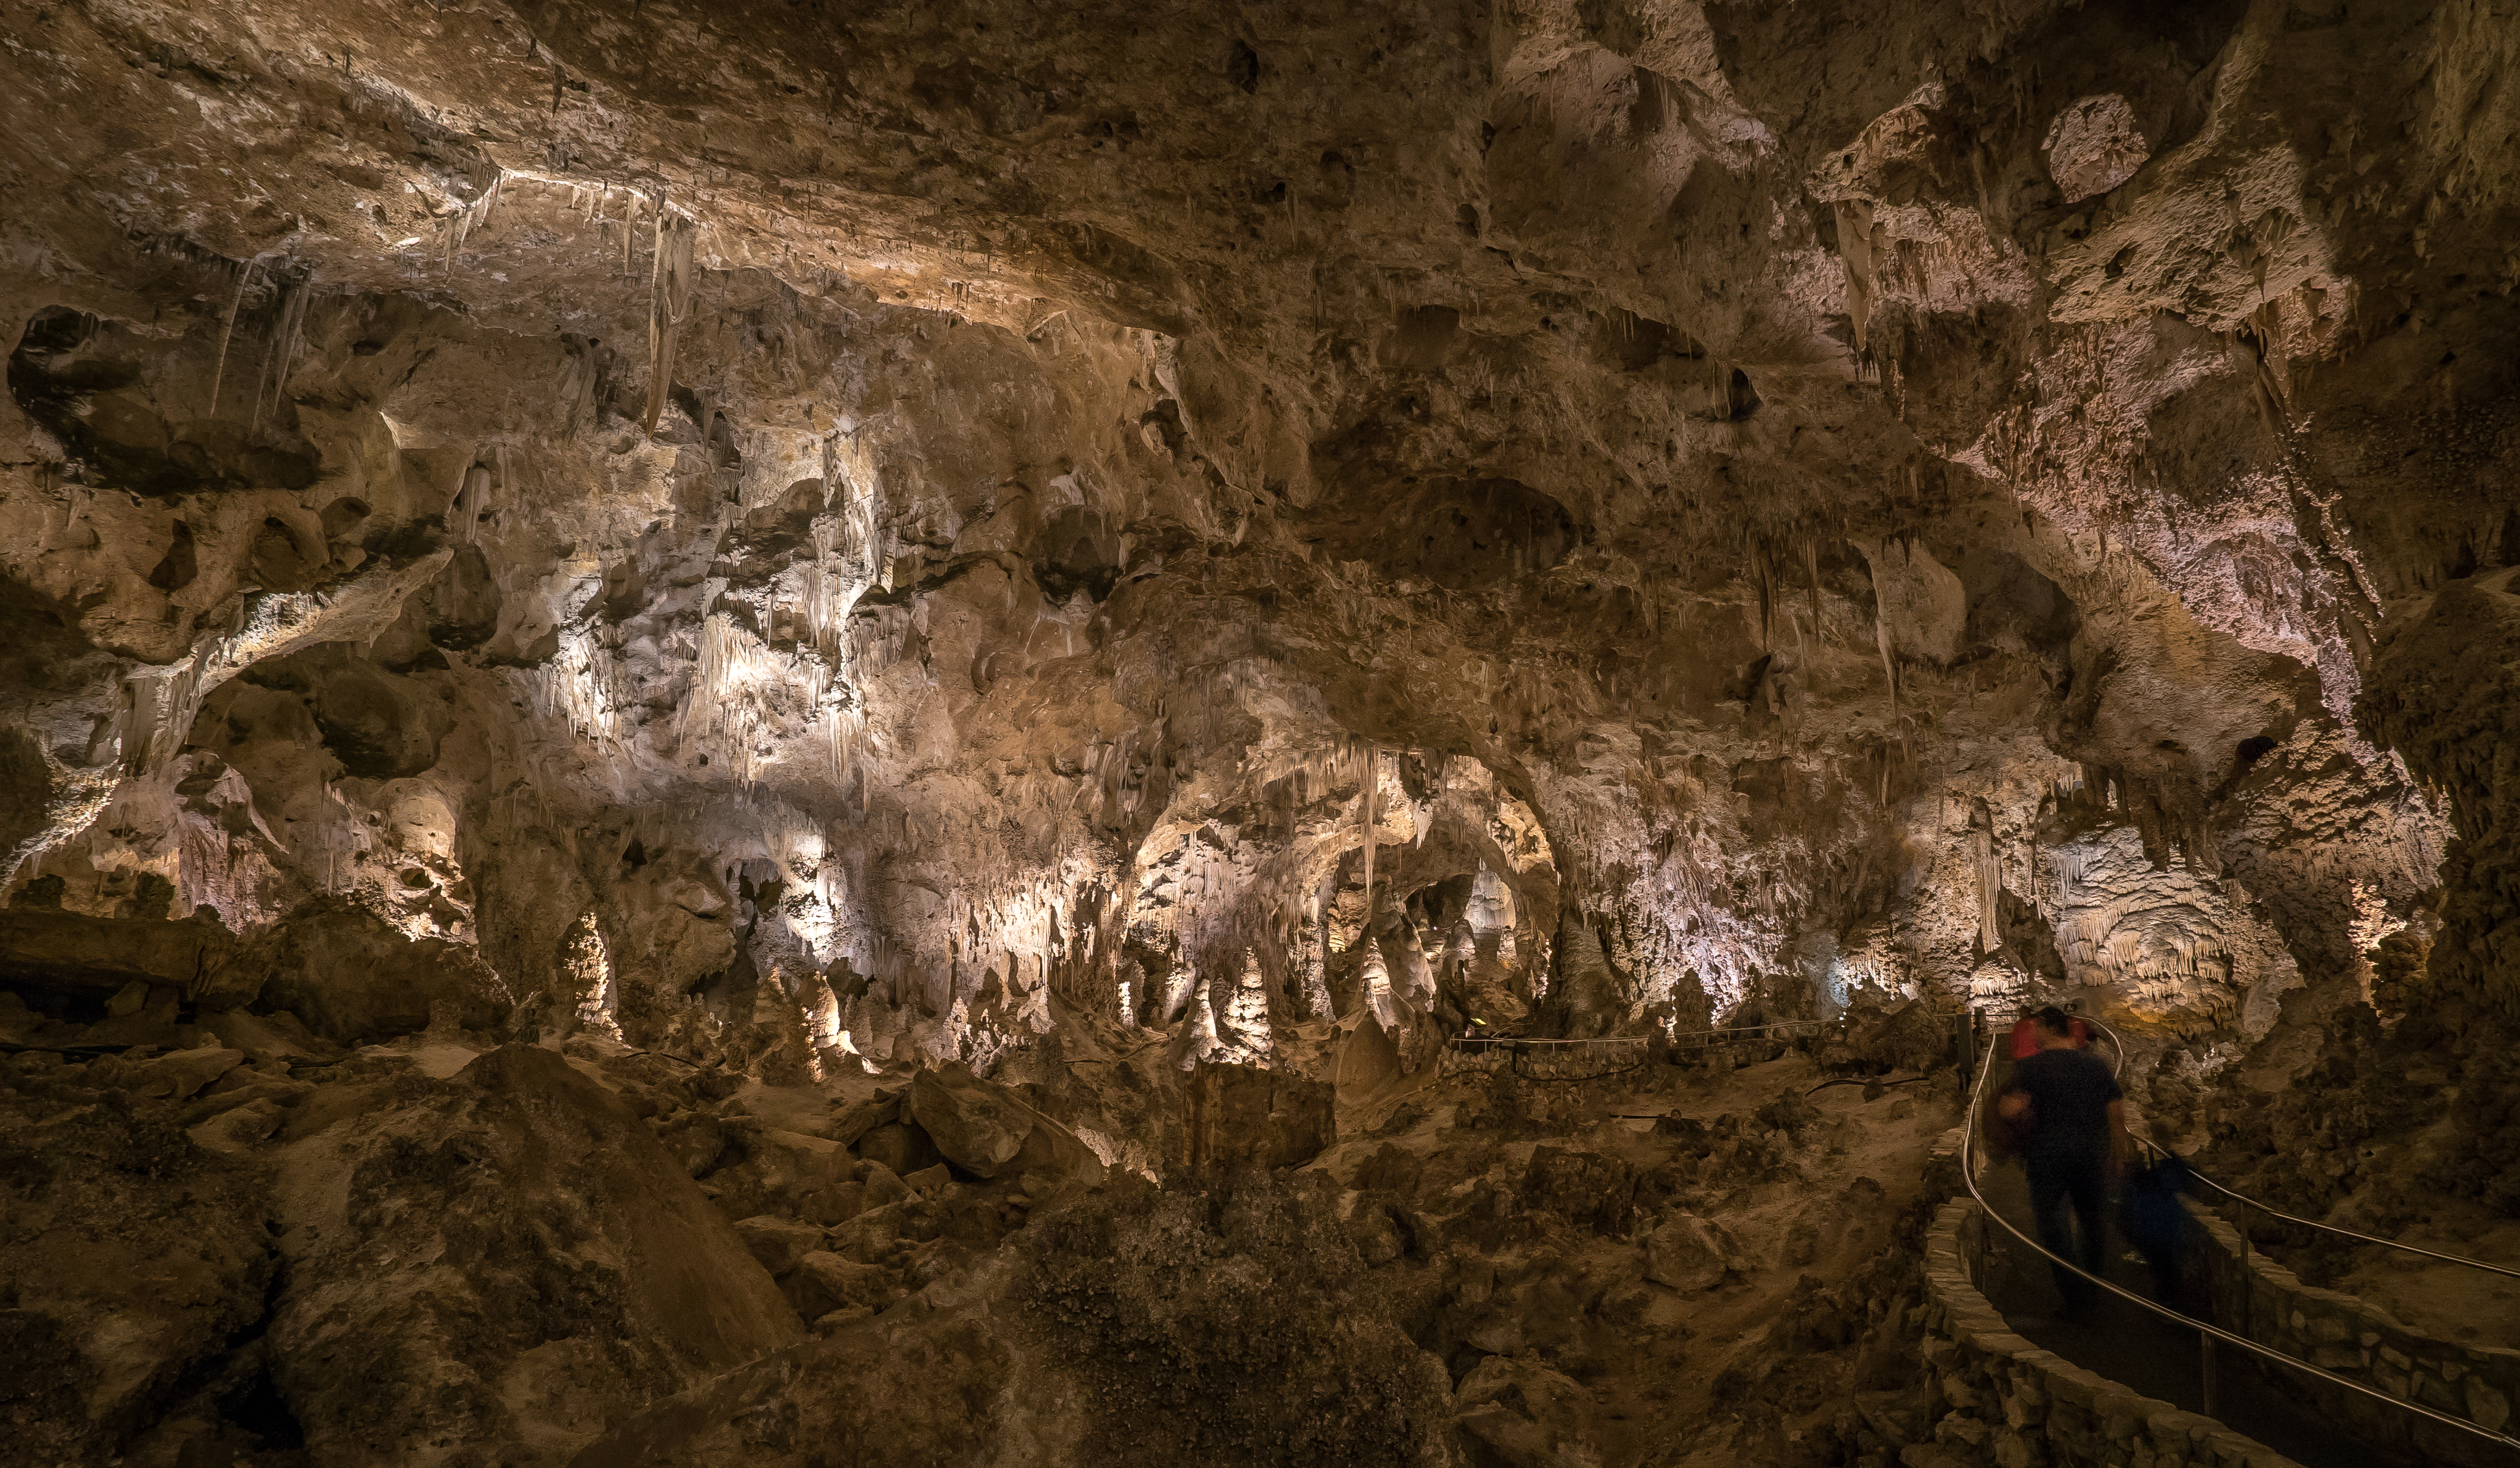 Carlsbad Caverns – One of the coolest, most under-rated national parks in the US!